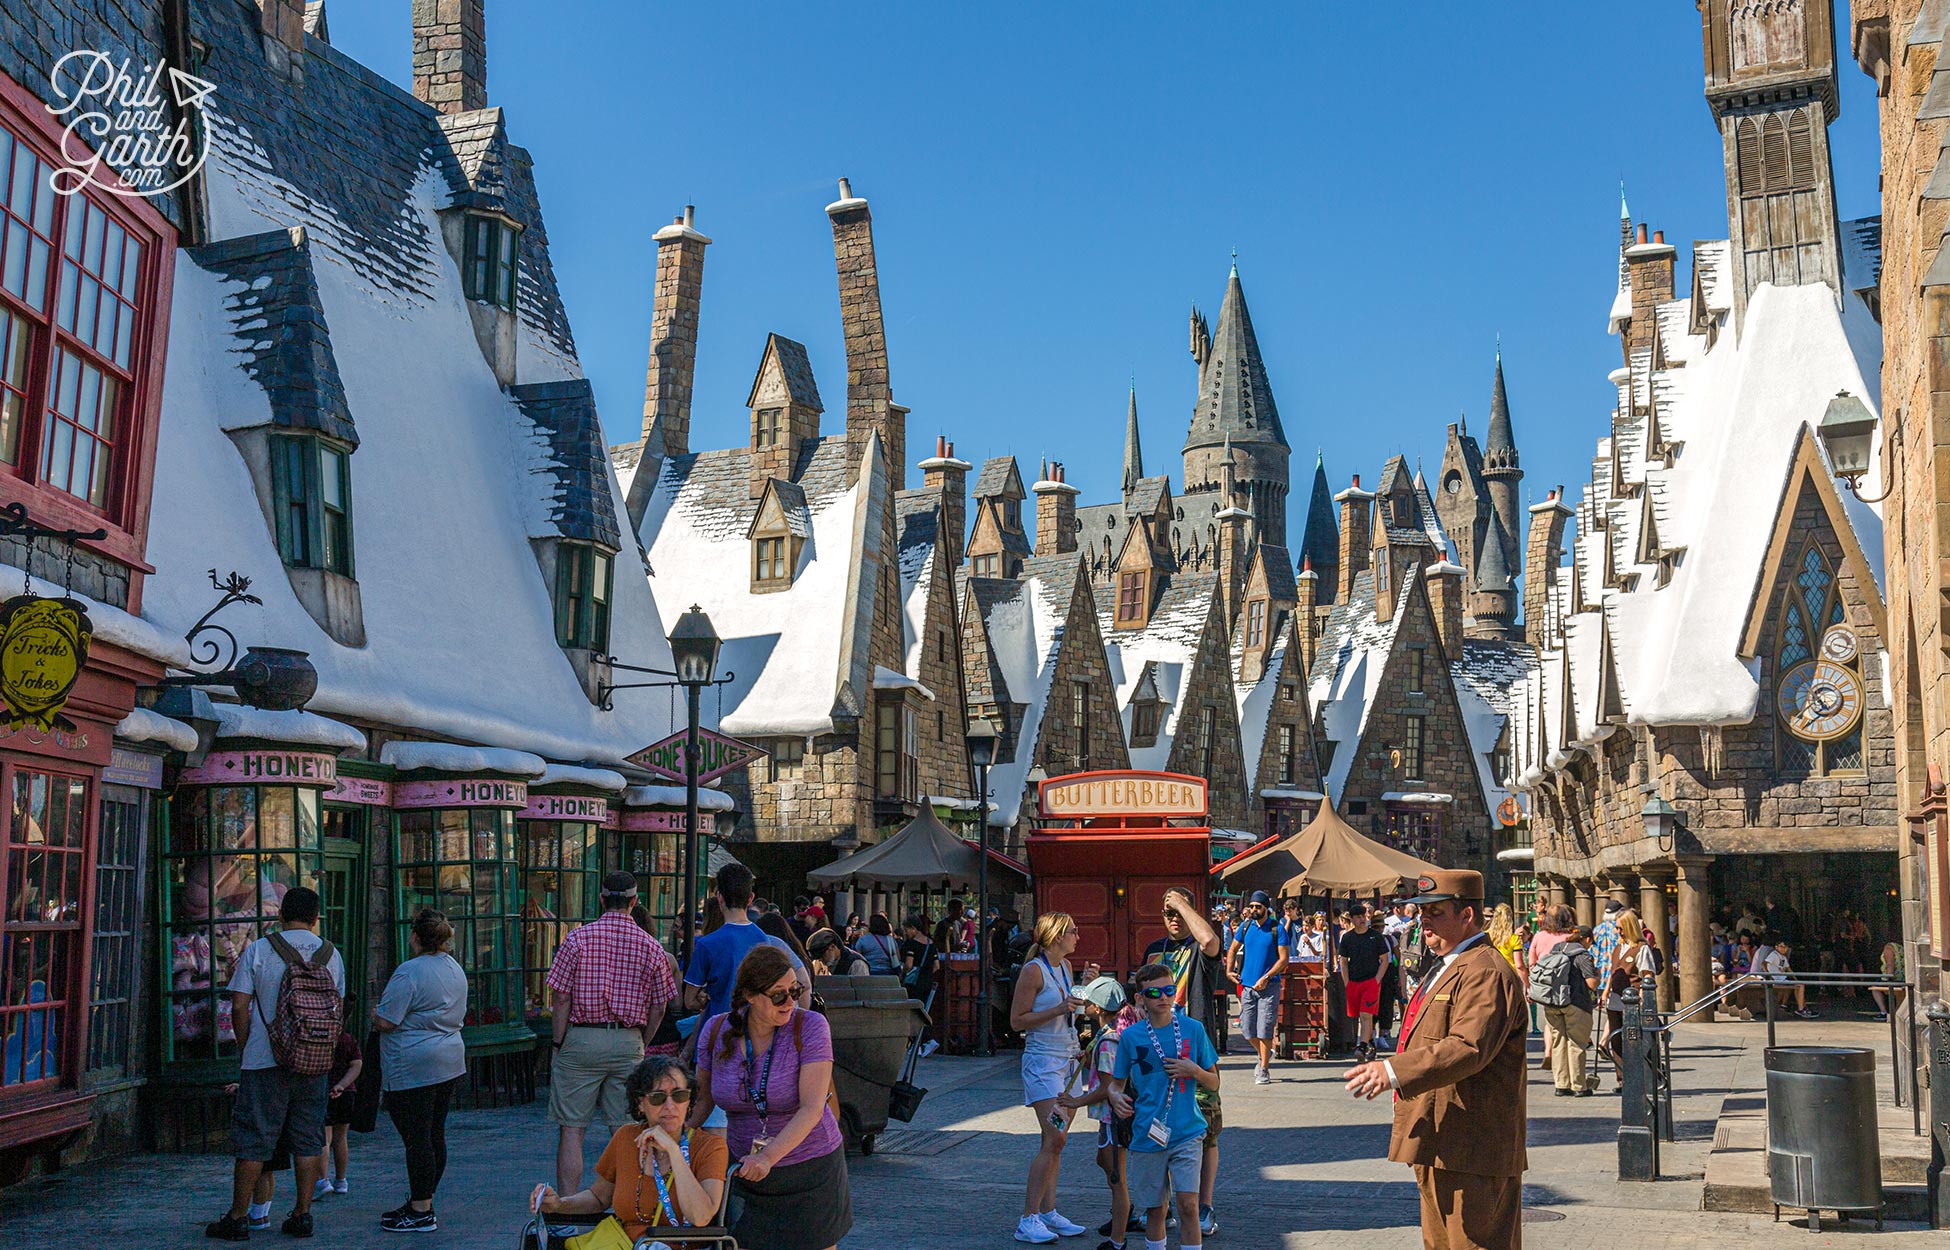 The stone houses, crooked chimneys and snowy rooftops make Hogsmeade feel so real